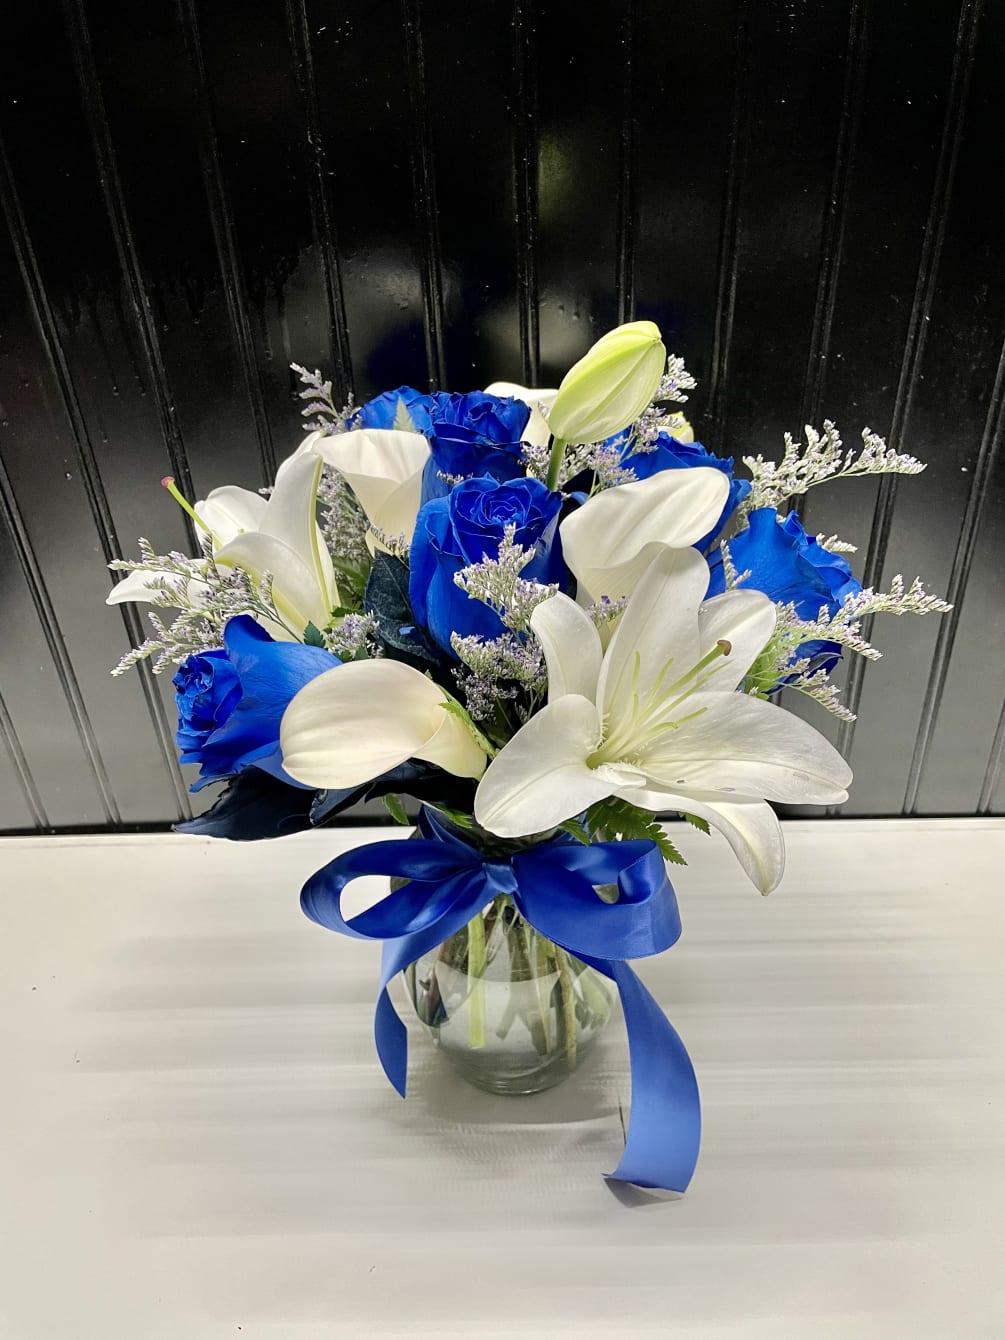 A beautiful arrangement short and compact with blue roses and white calla